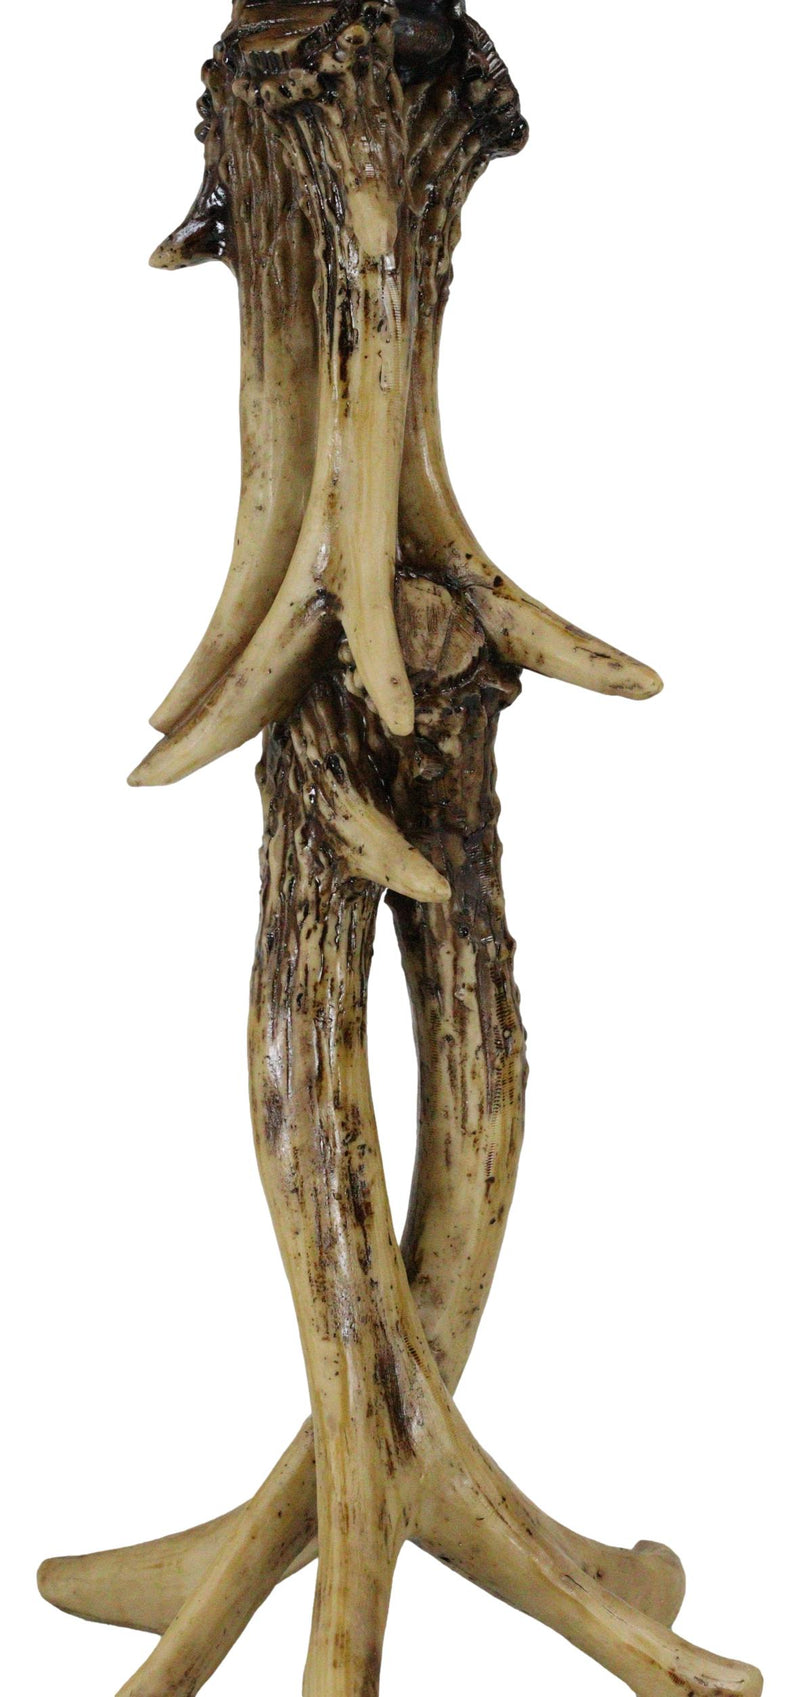 Ebros Wildlife Rustic Buck Elk Deer Stag Entwined Antlers Candle Holder Stand 14" Tall Nature Lovers Hunters Cabin Lodge Country Home Decorative Antler Candleholder Accent Centerpiece (1)